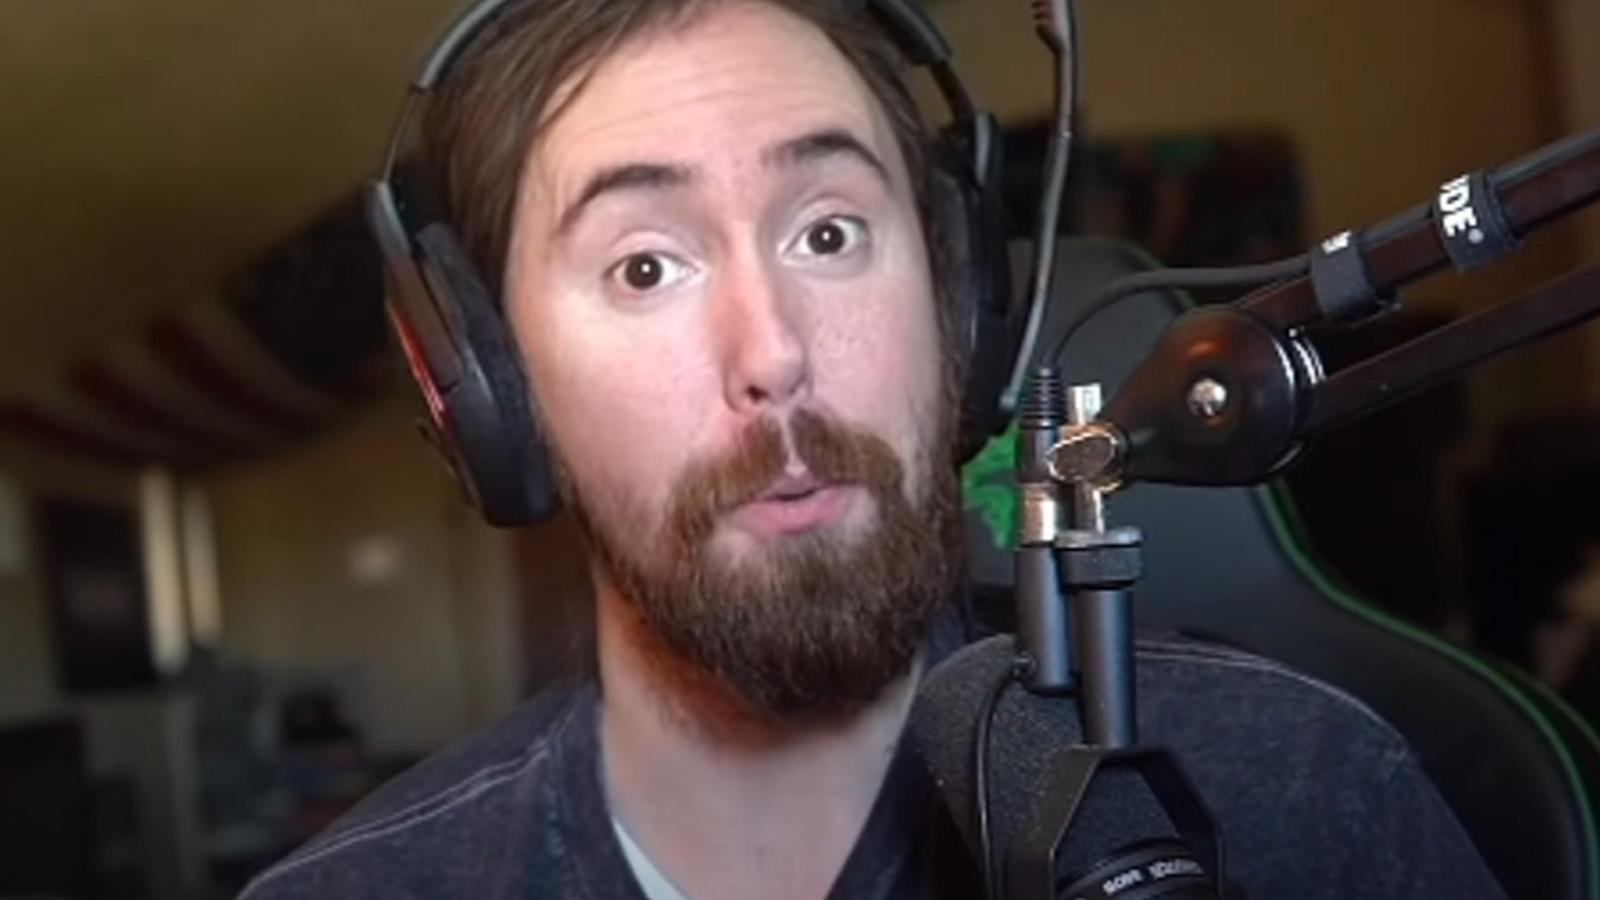 Asmongold hits back at 'sexist' claims after saying Twitch culture is for 'losers'